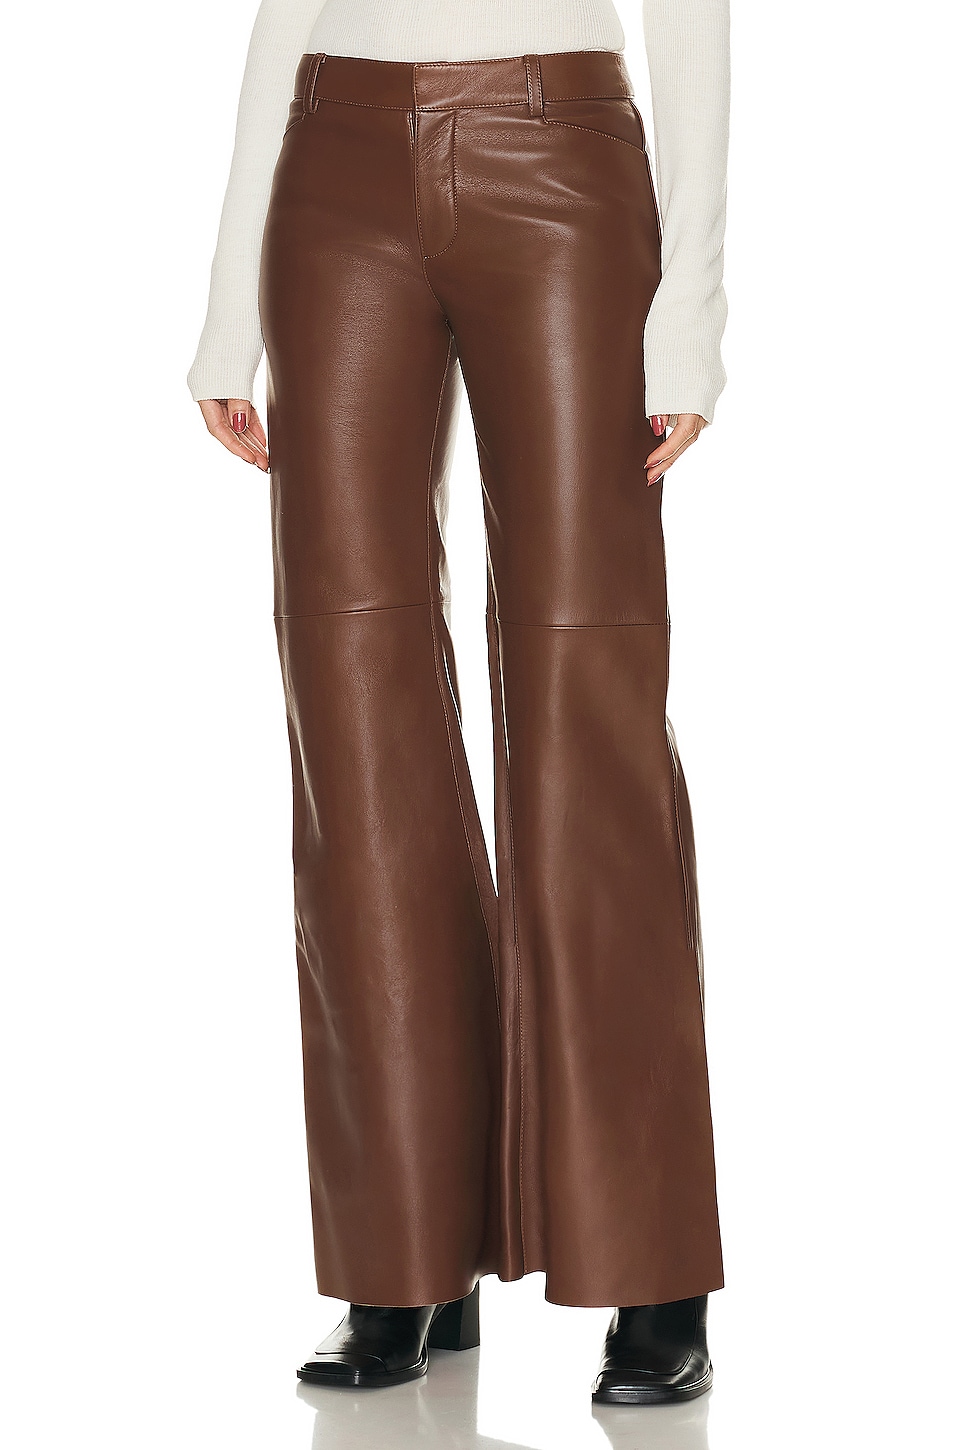 Image 1 of Chloe Flare Leather Pant in Dark Chestnut